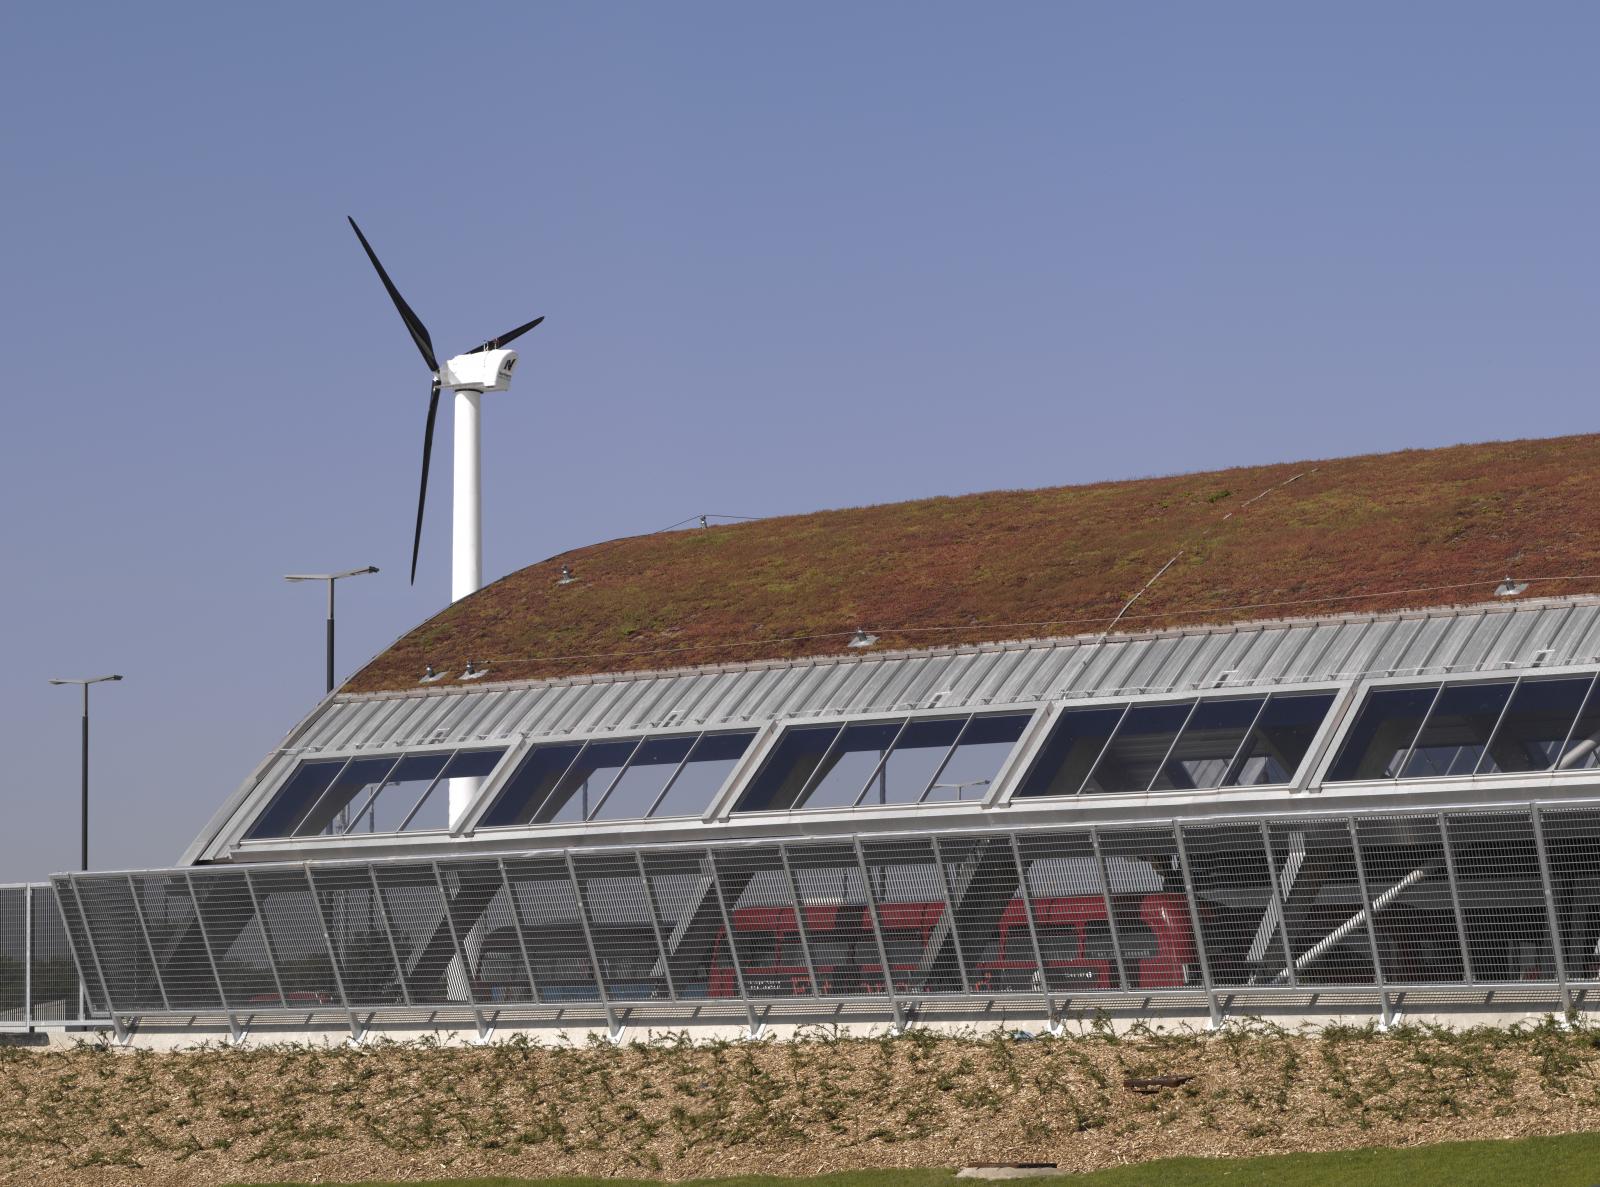 London bus shelter with green roof and wind turbine